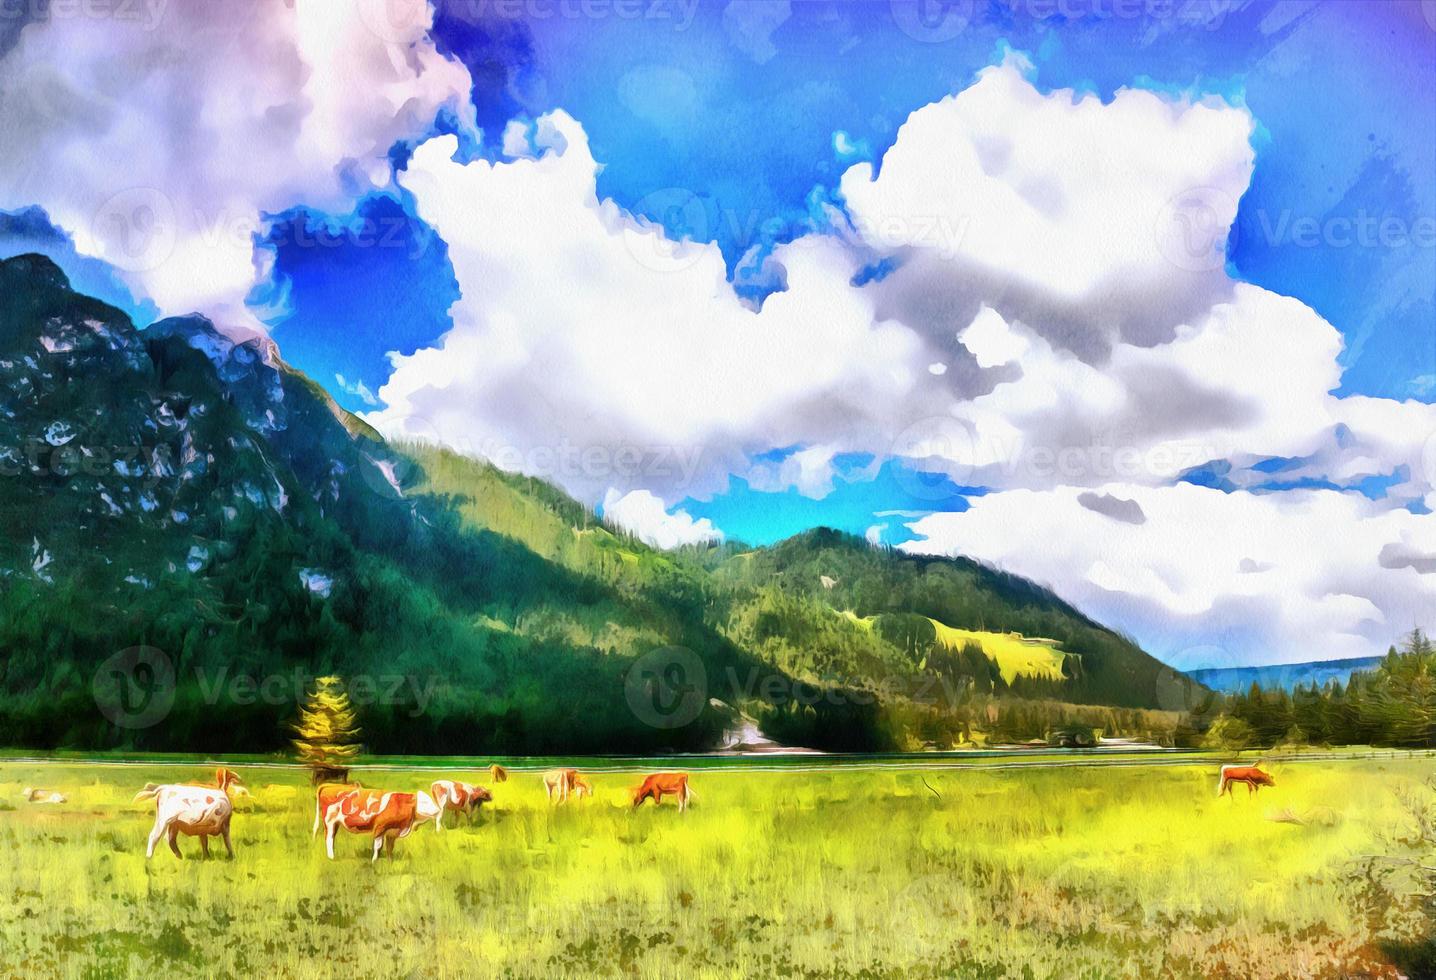 The works in the style of watercolor painting. Cows on pasture. photo